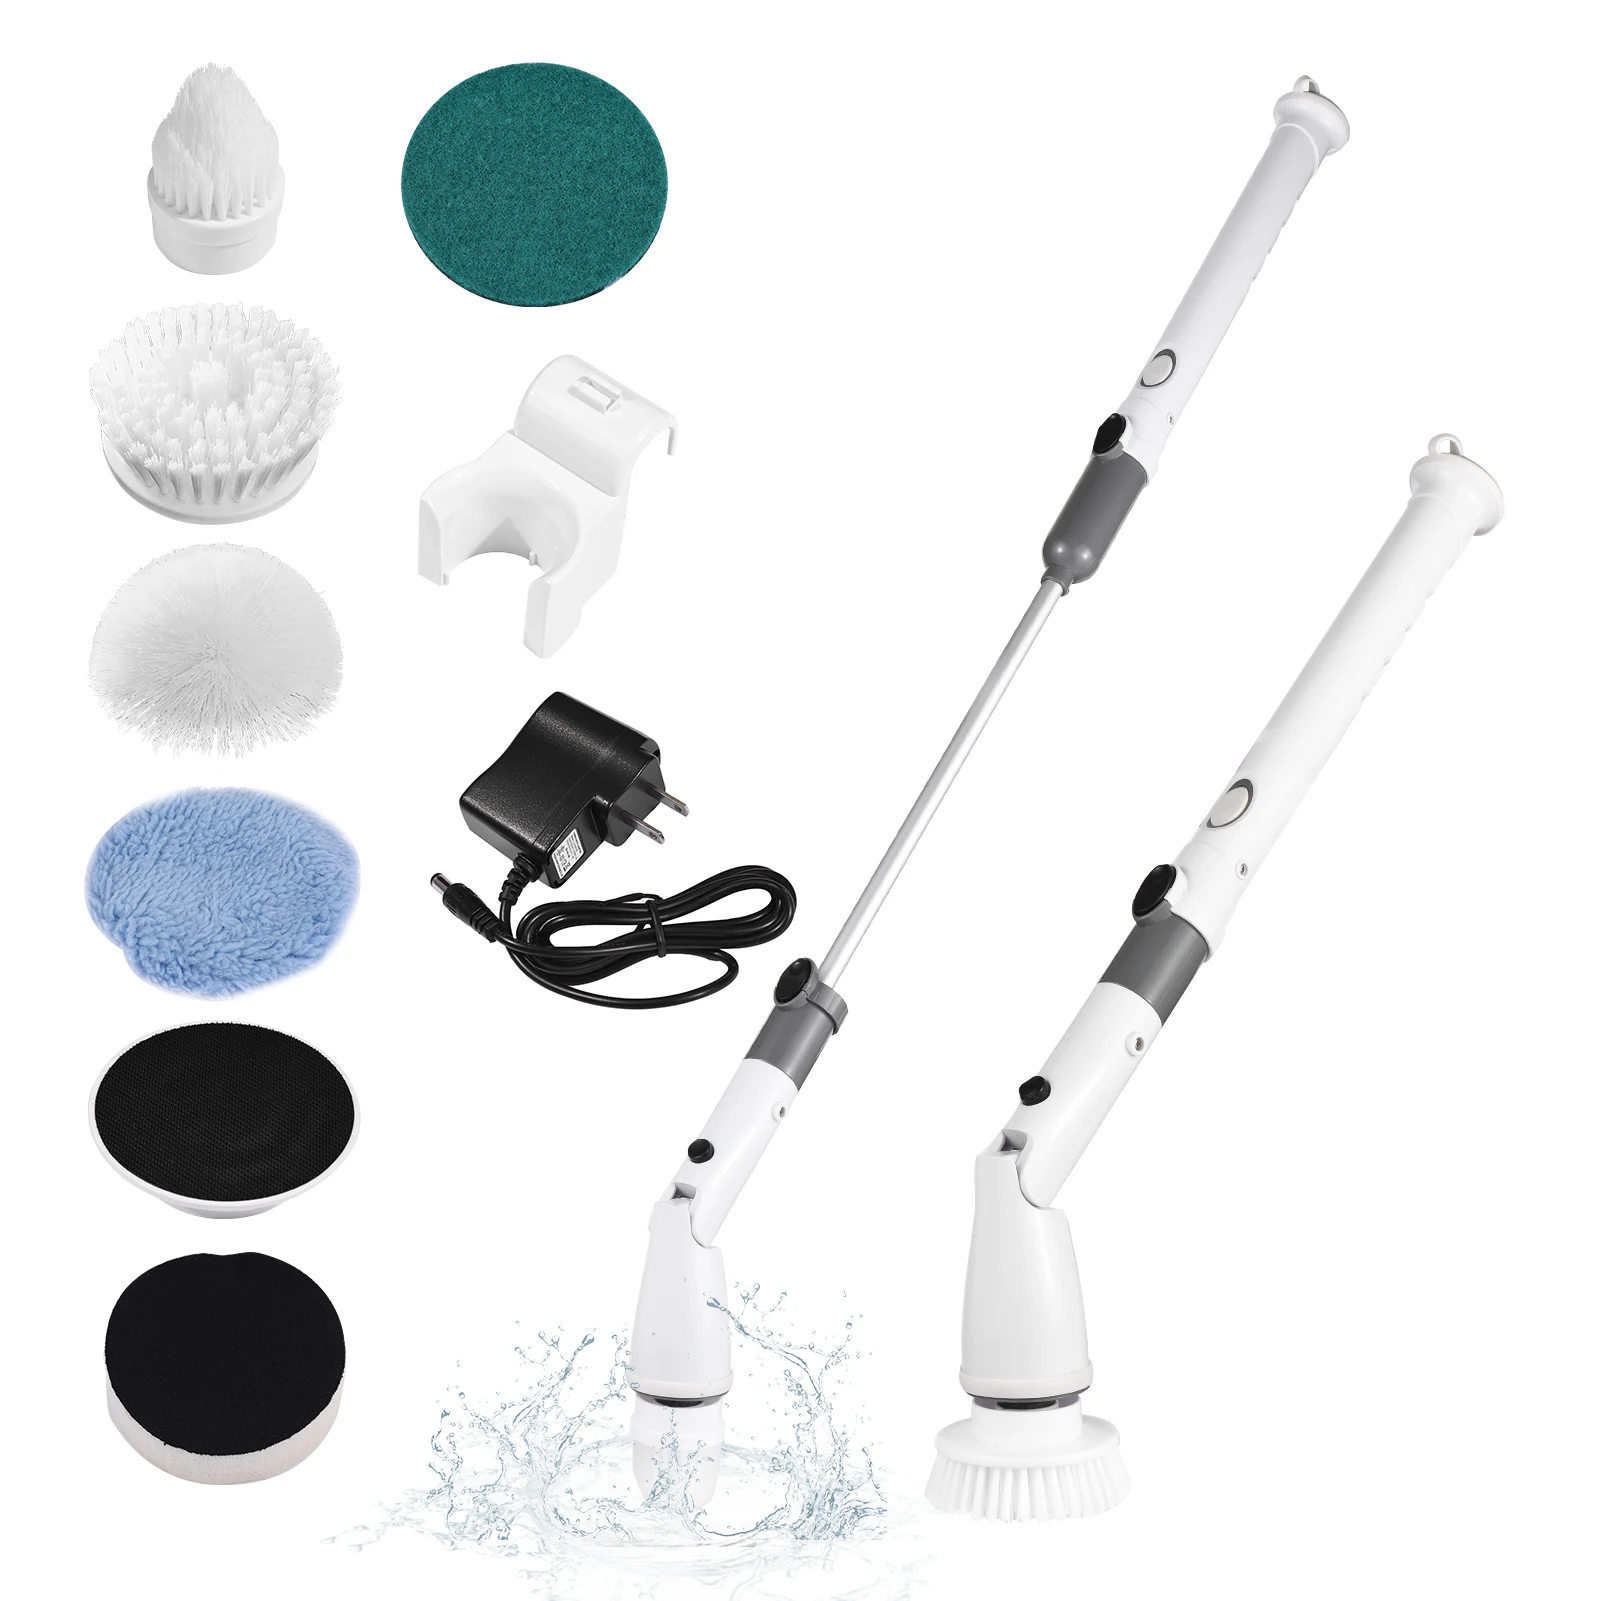 https://ae01.alicdn.com/kf/S5b738831f5f1443988a25b8c40d155a7u/7IN1-Electric-Spin-Scrubber-Cordless-Handheld-Cleaning-Brush-Adjustable-Extension-Handle-for-Kitchen-Bathroom-Wall-Window.jpg